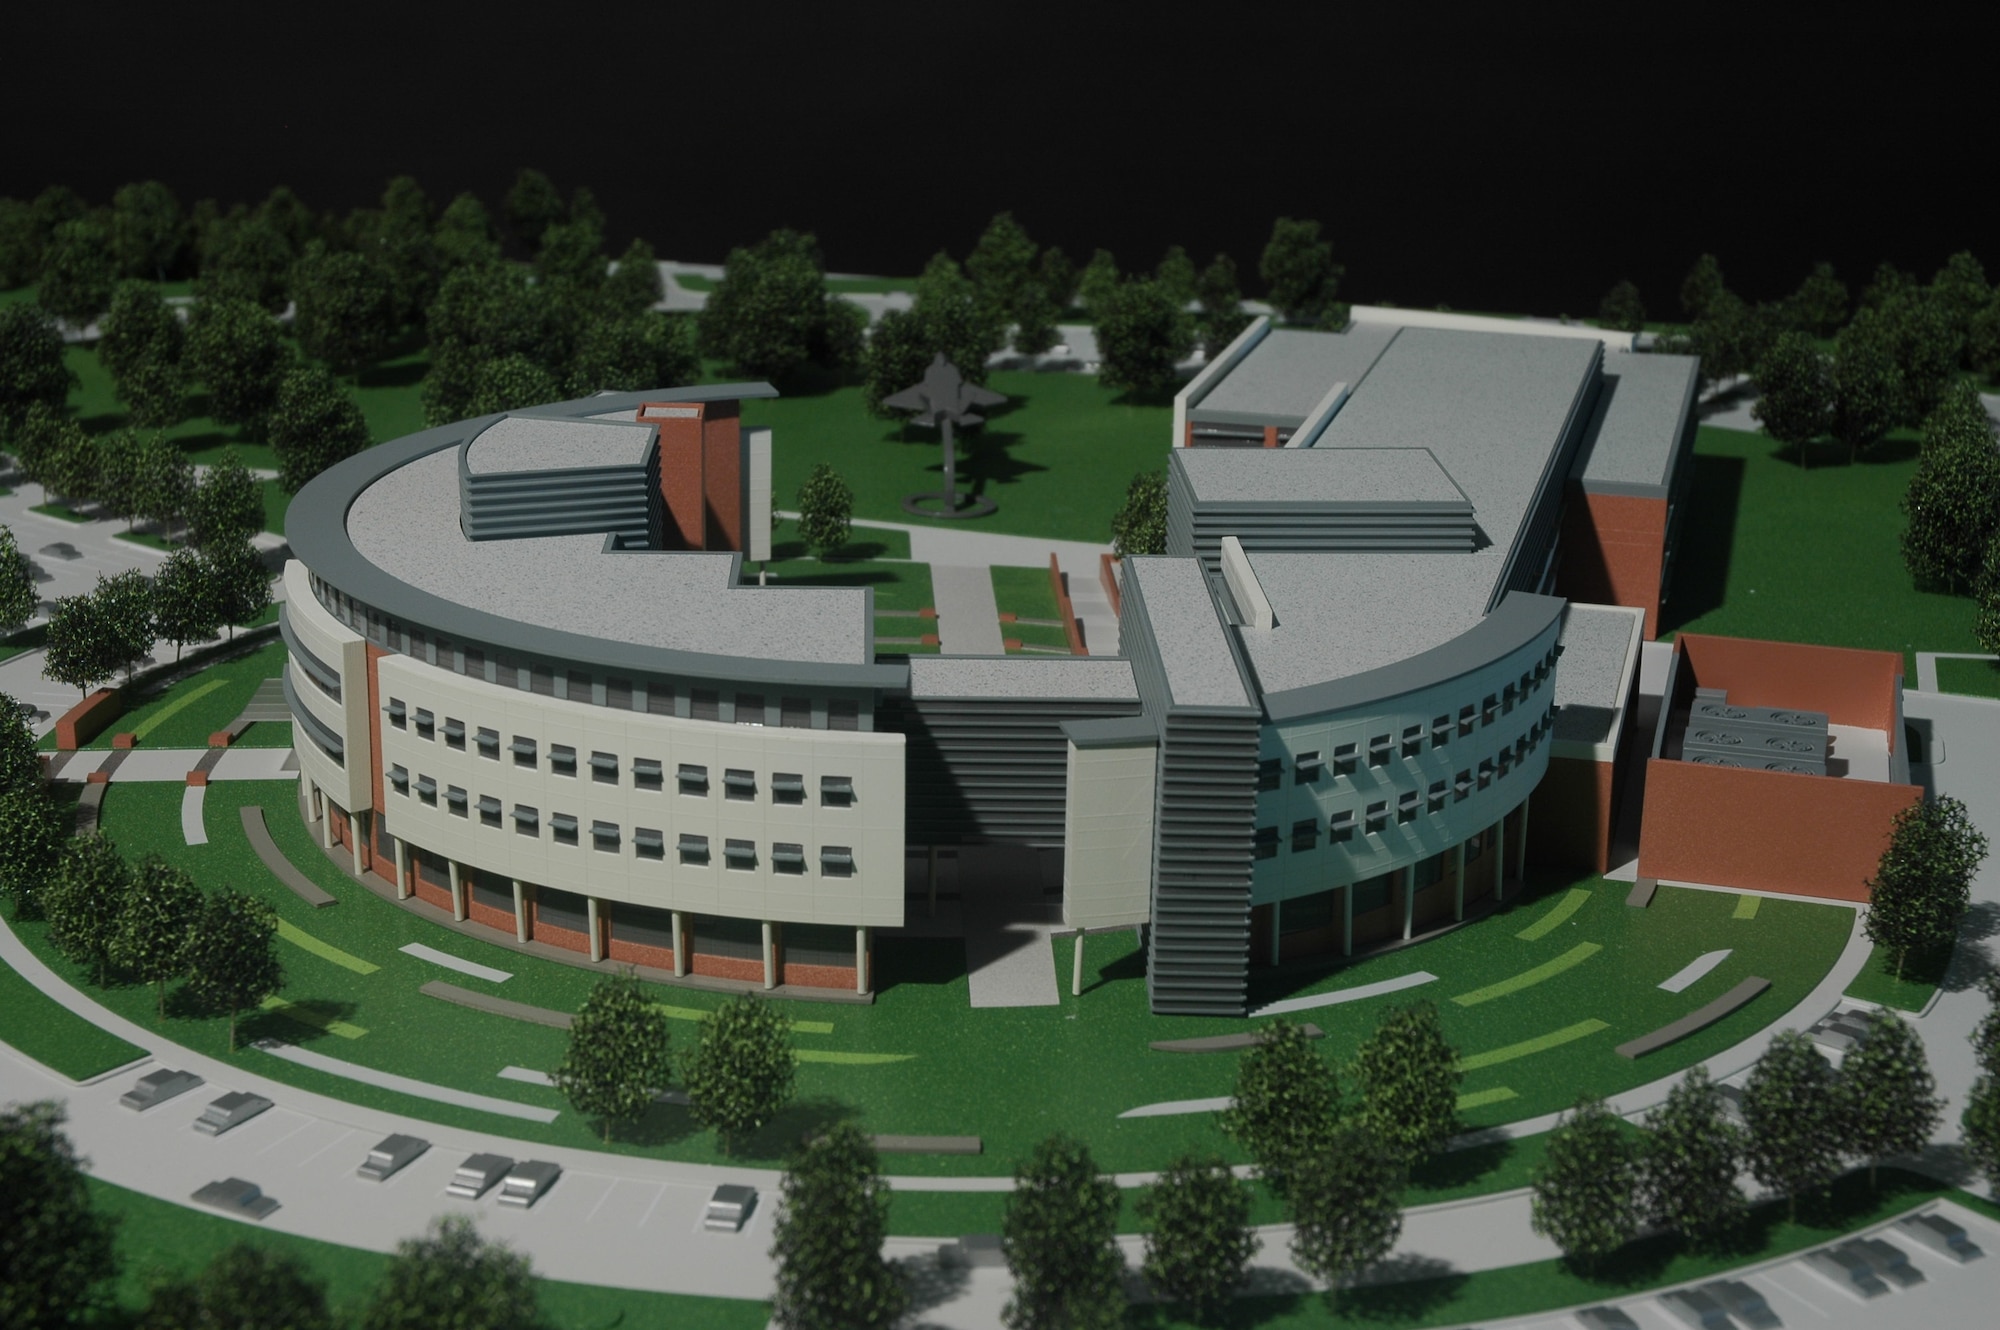 The model of the new Headquarters Air Force Reserve Complex is on display in the current headquarters building. The model was unveiled Nov. 13, 2012, on Robins Air Force Base, Ga. (Courtesy illustration).